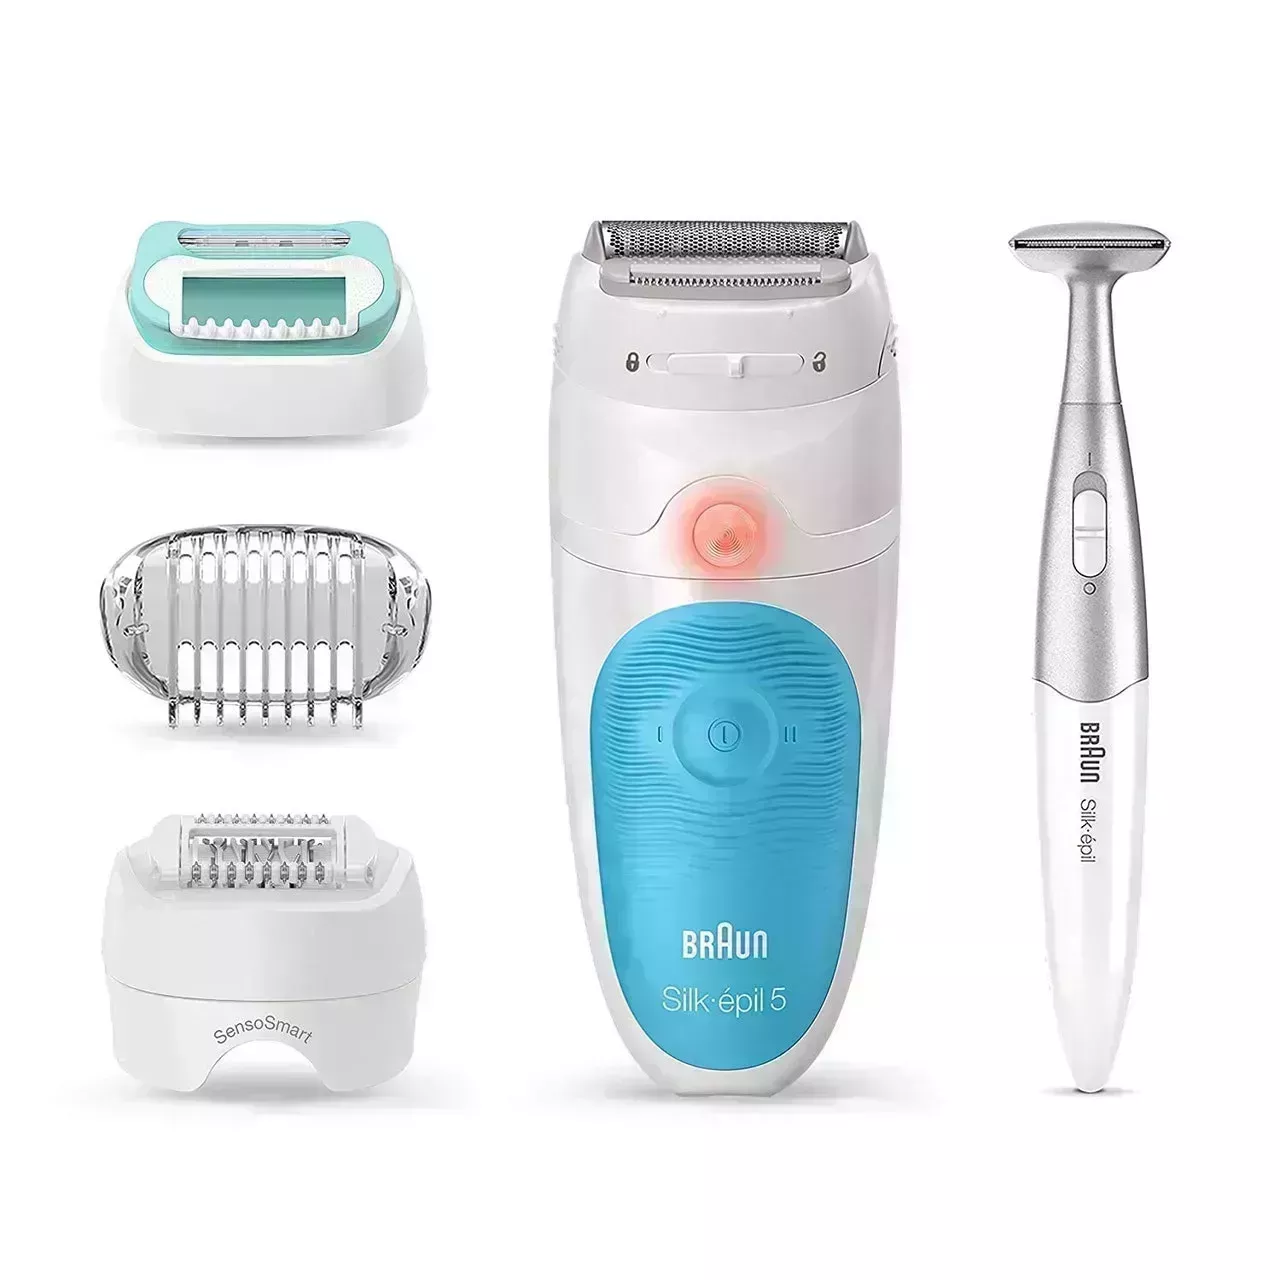 A blue and white Braun Epilator Silk-épil 5 5-810 and heads/attachments on white background